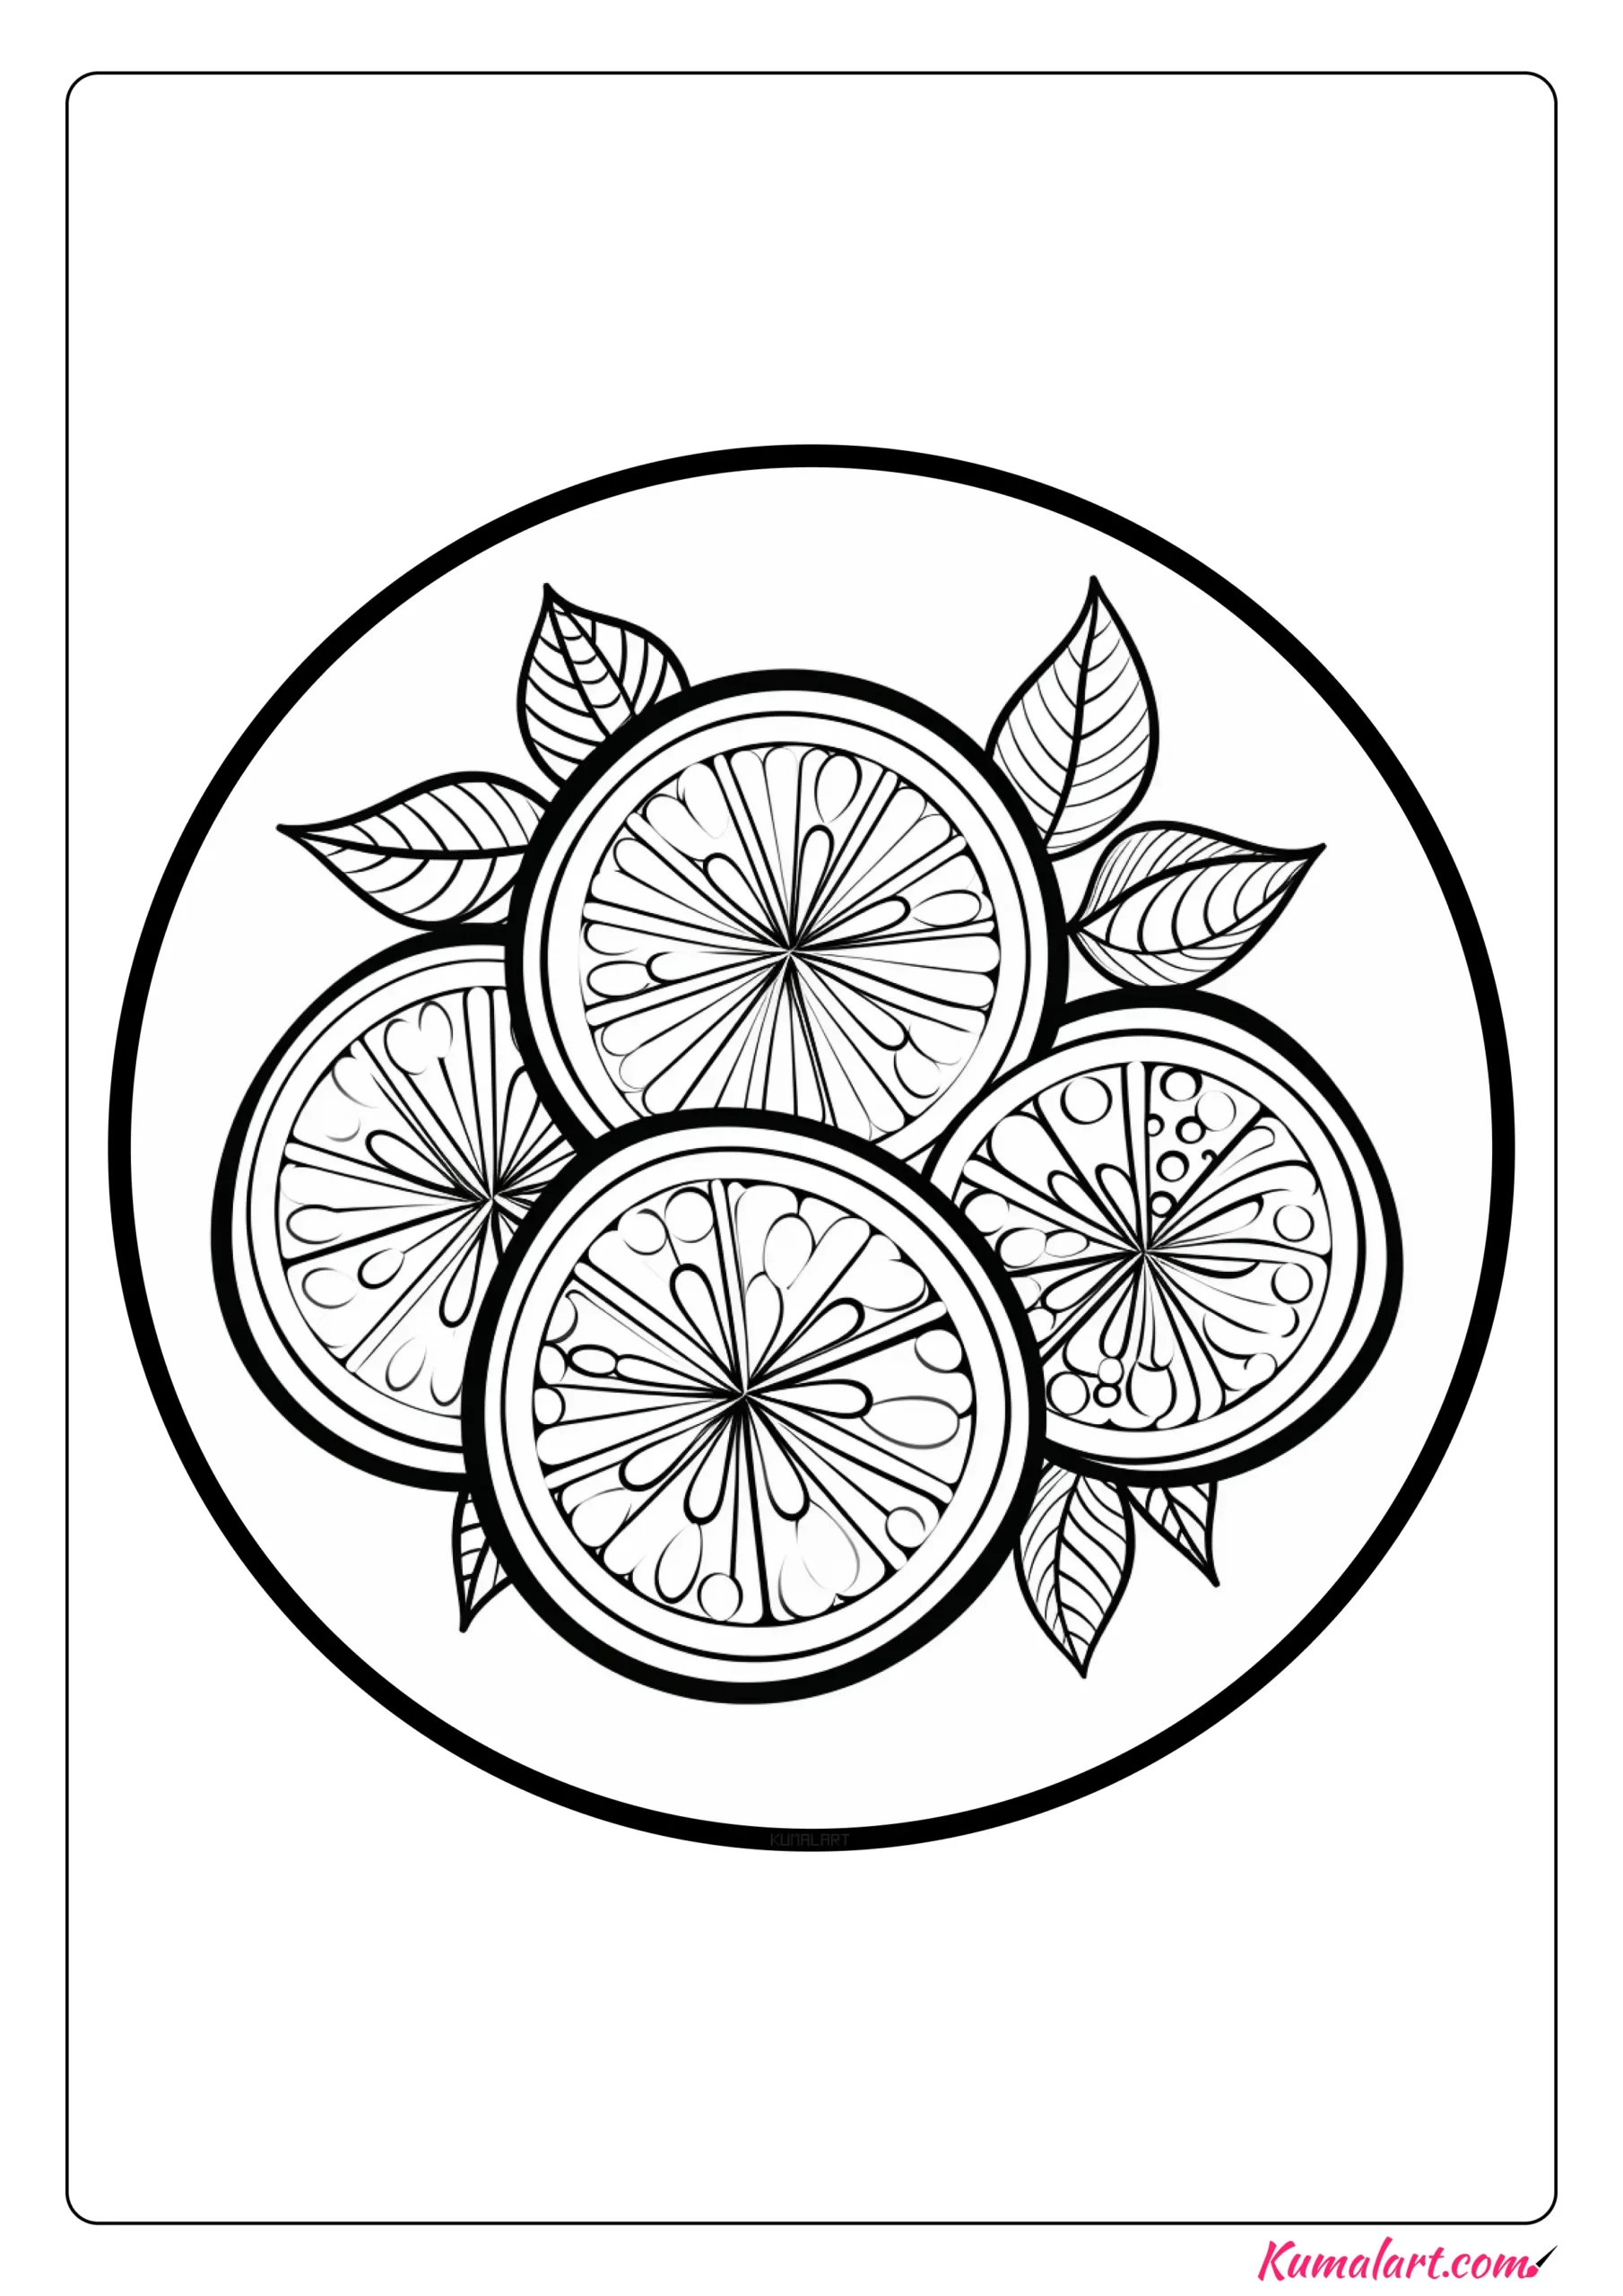 🍋Delightful Lemon Coloring Pages: Explore, Download, And Color! - Kumalart